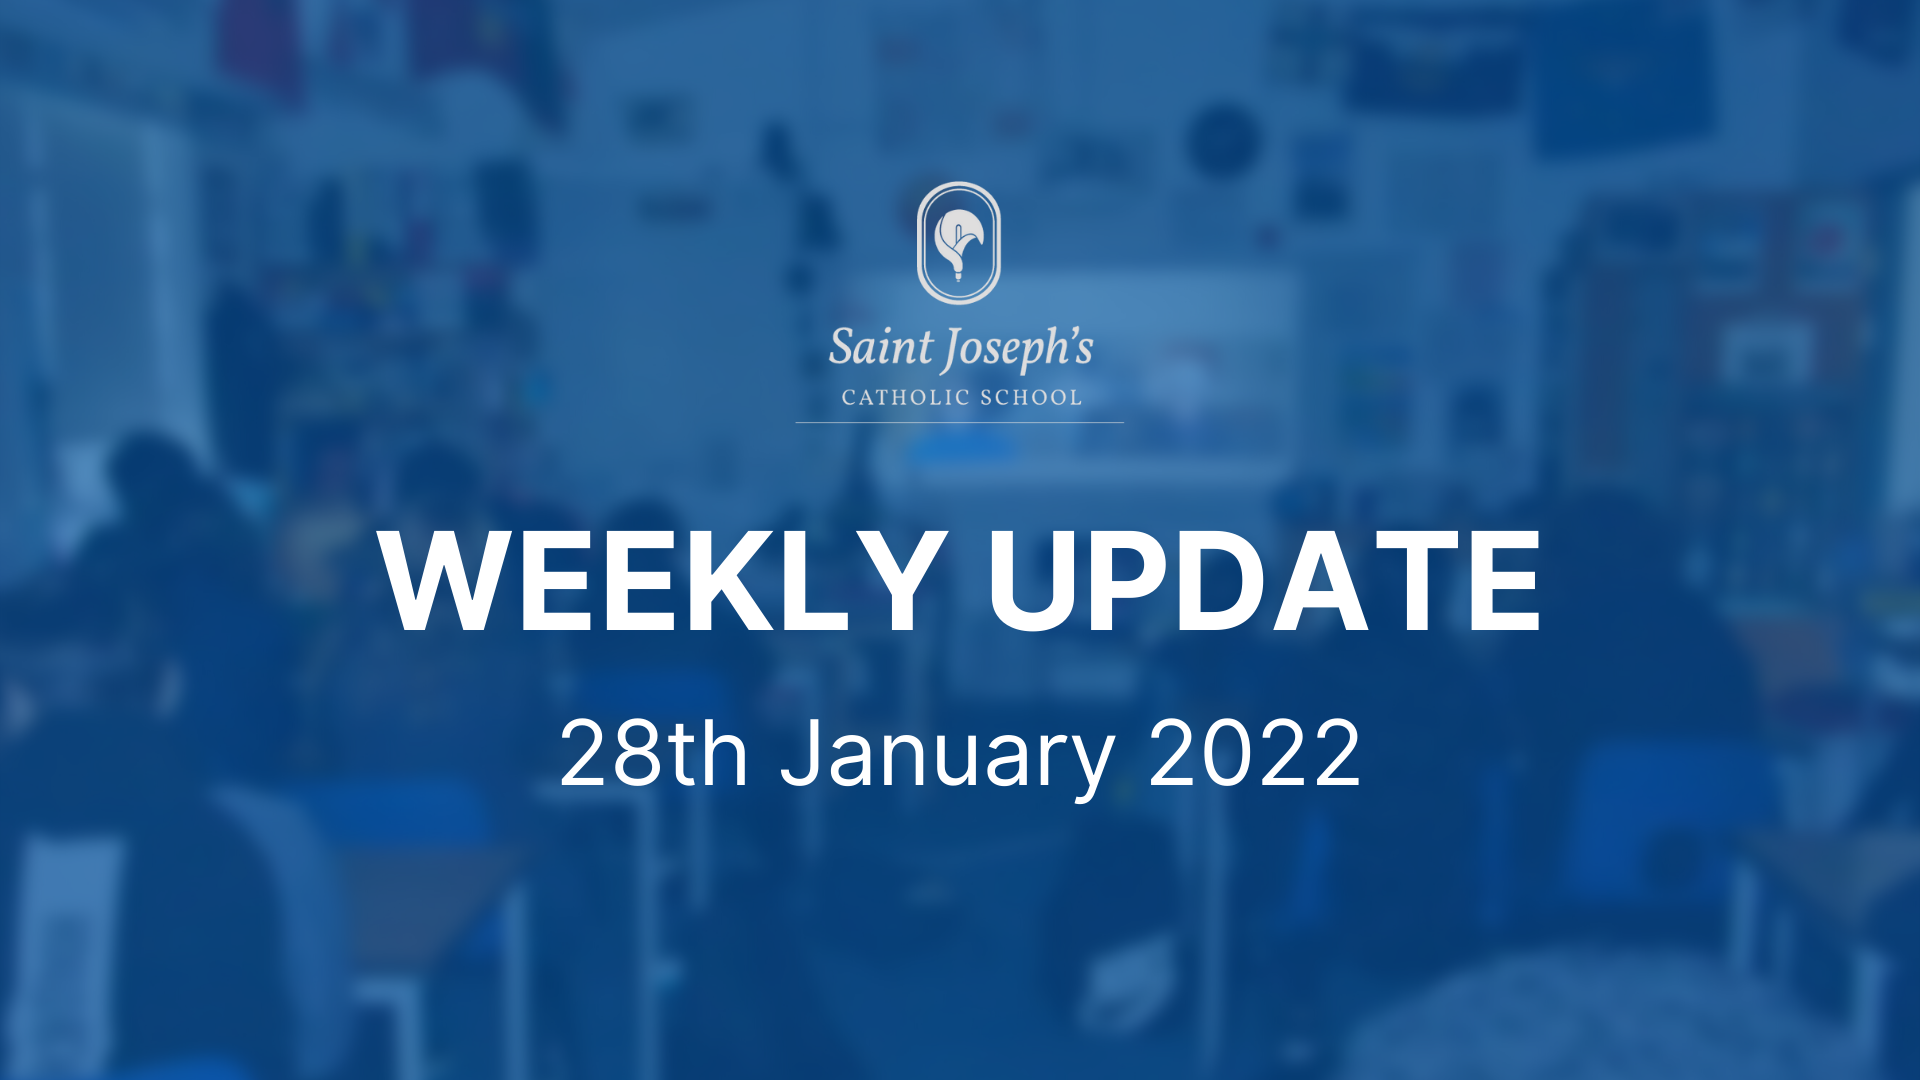 Featured image for “Weekly Update: 28th January 2022”